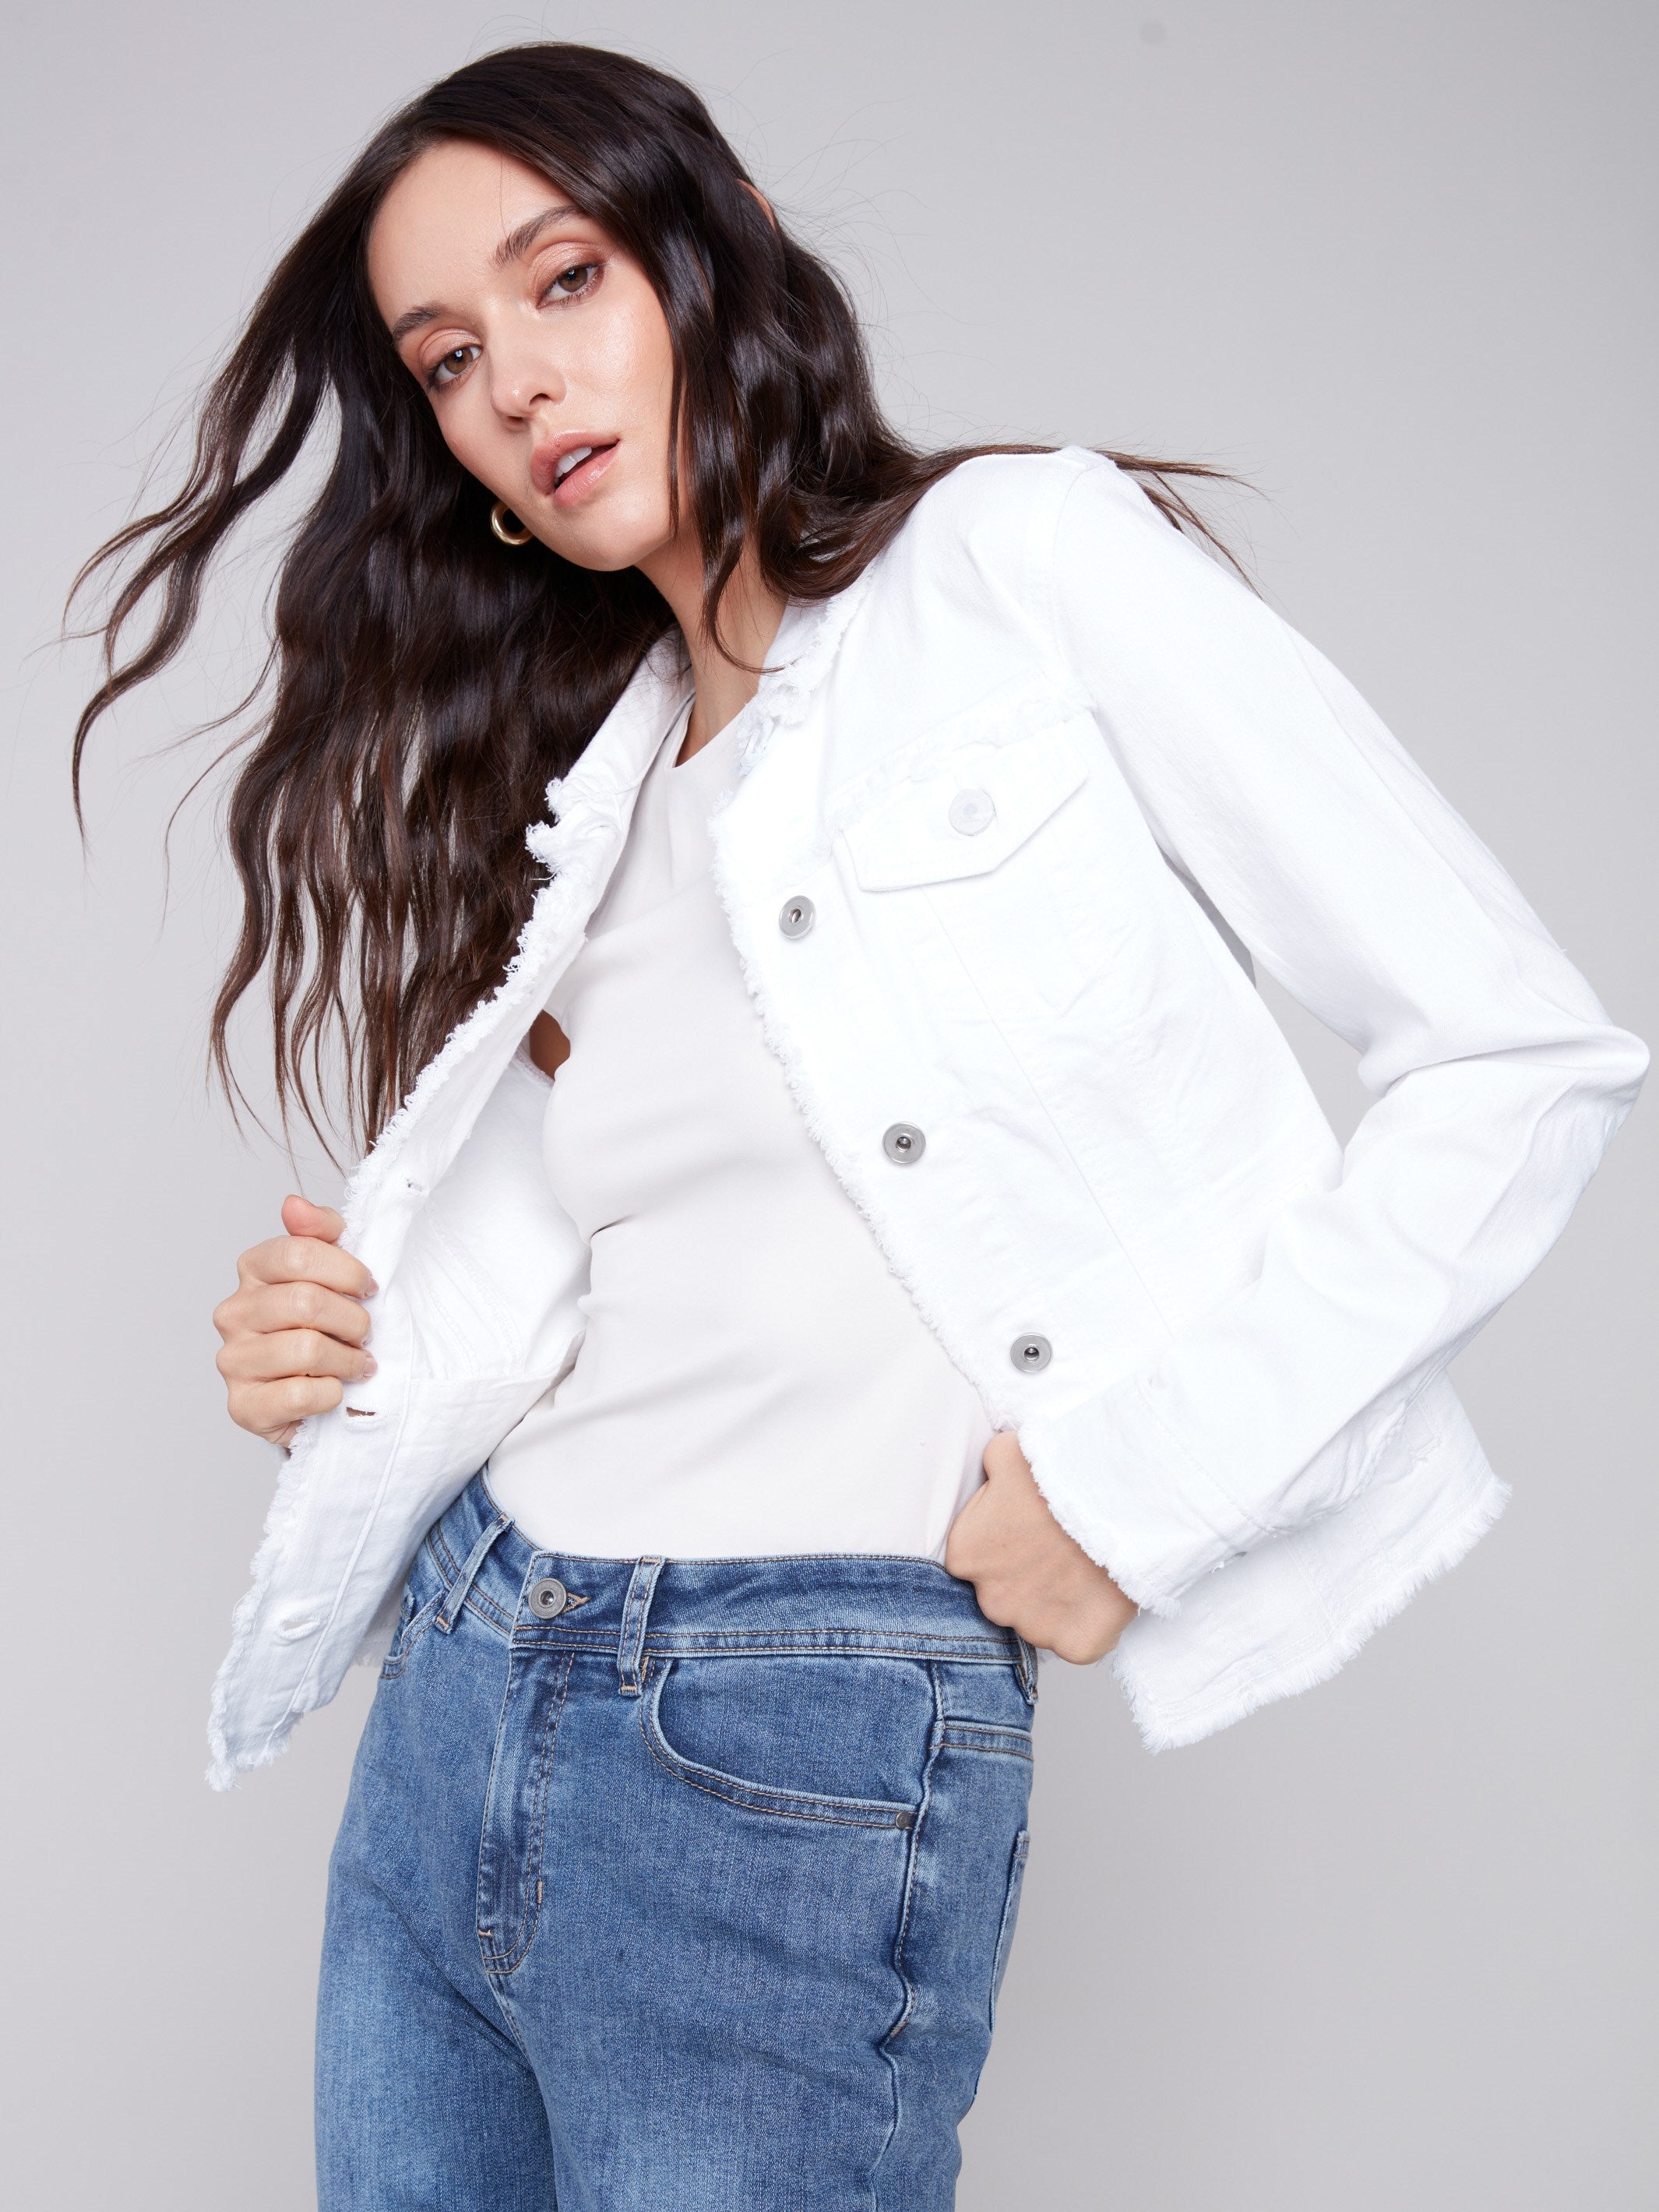 Twill Jean Jacket with Frayed Edges - White - Charlie B Collection Canada - Image 3